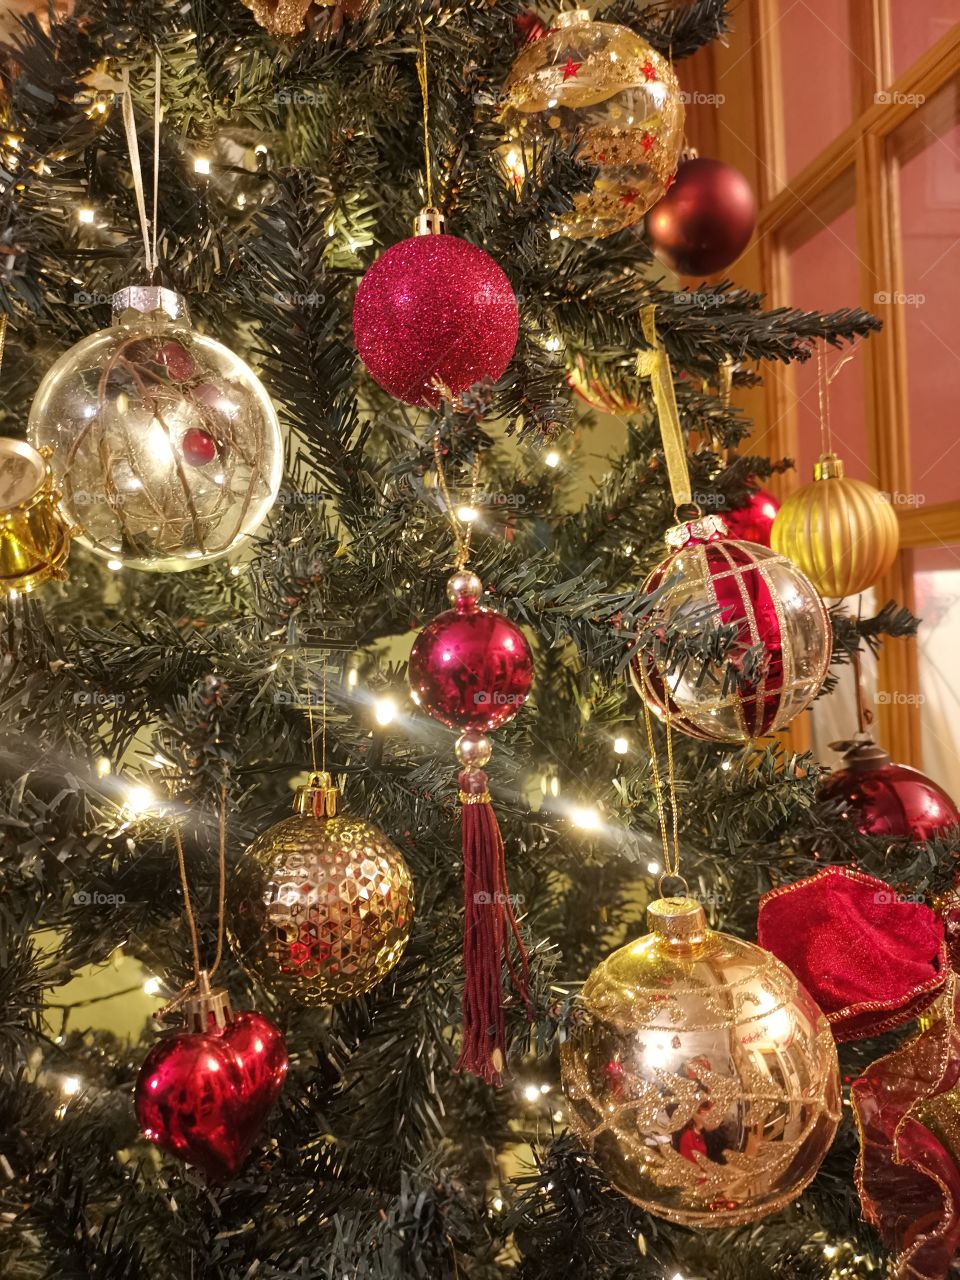 Baubles on the tree